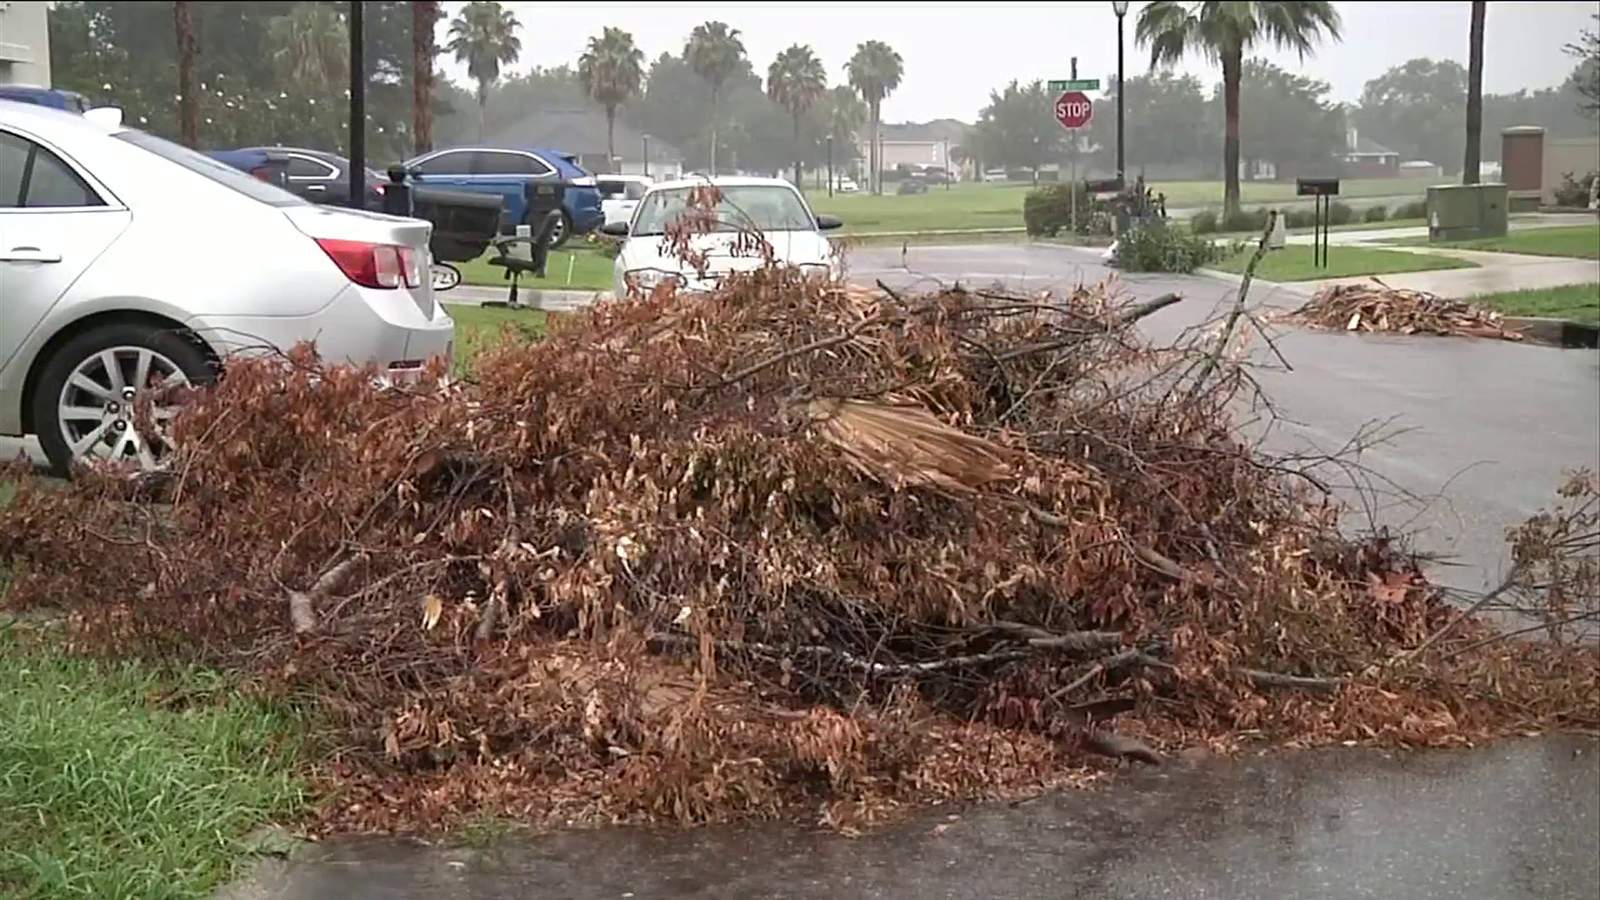 Yard waste cleared from Jacksonville neighborhood after month-long issue